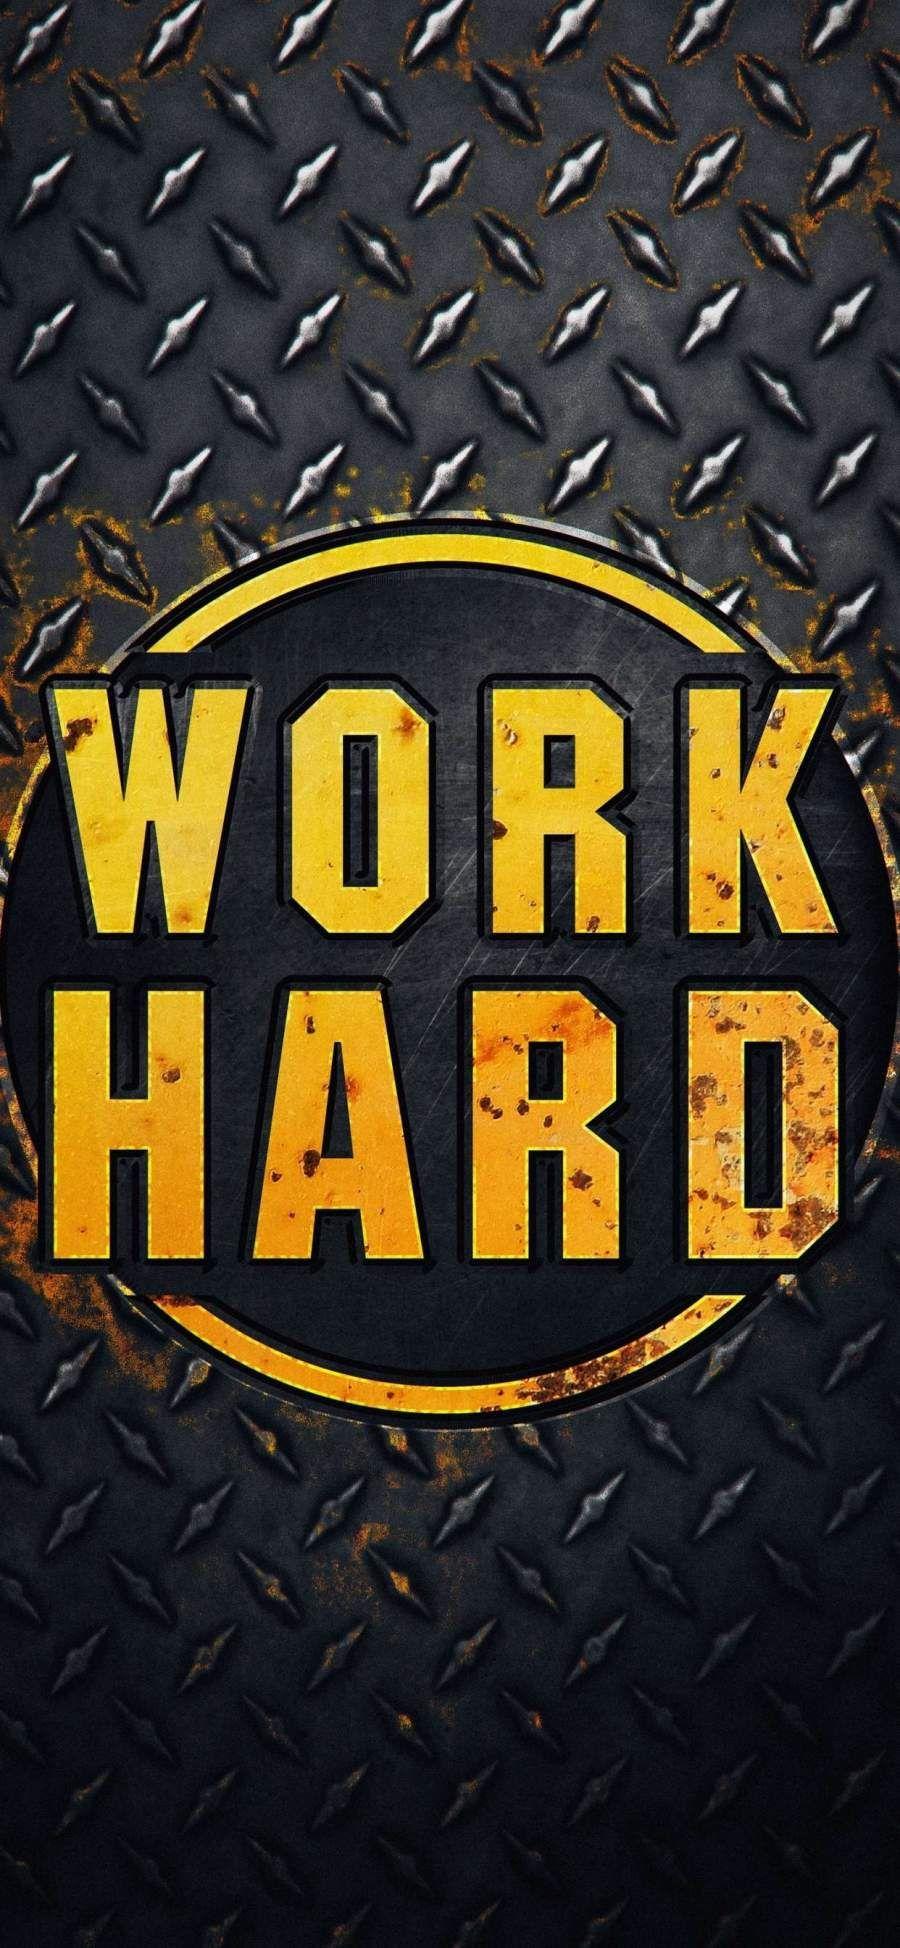 Motivation Work Hard Dream Big wall poster wallpaper 12 X 18 Inches